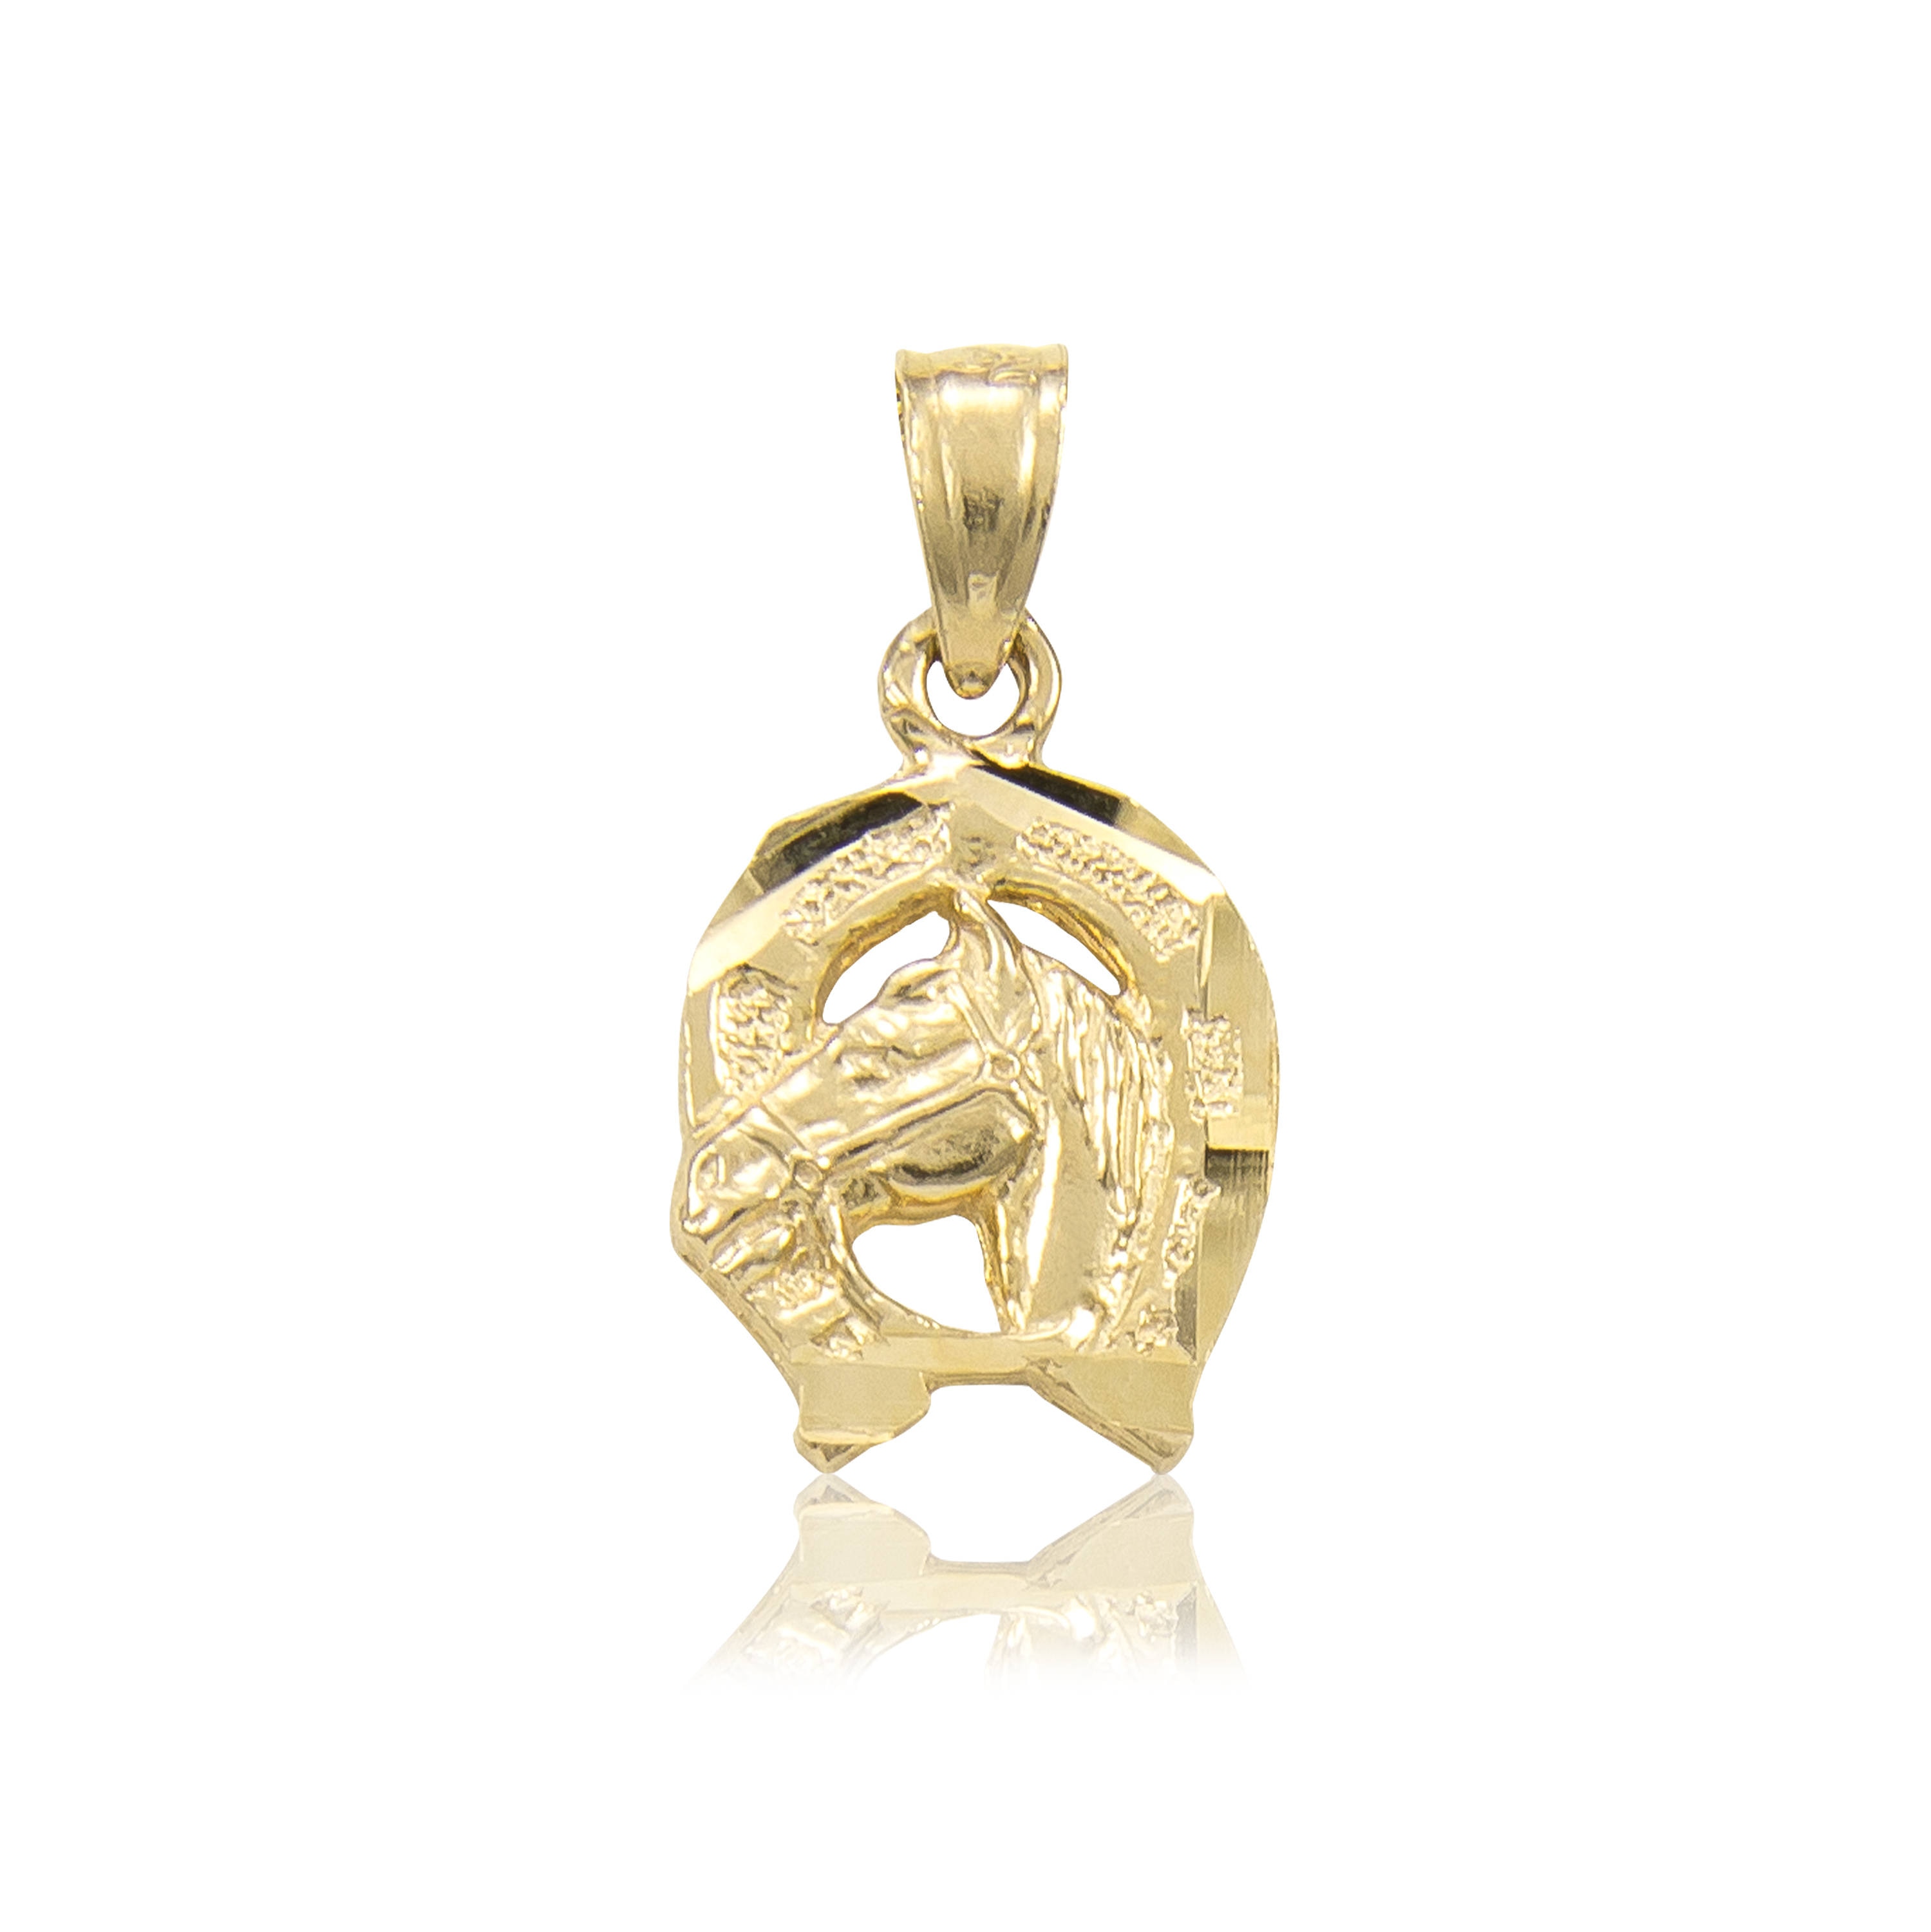 Solid 14K Yellow Gold Good Luck Horseshoe with Horse Head Pendant Necklace